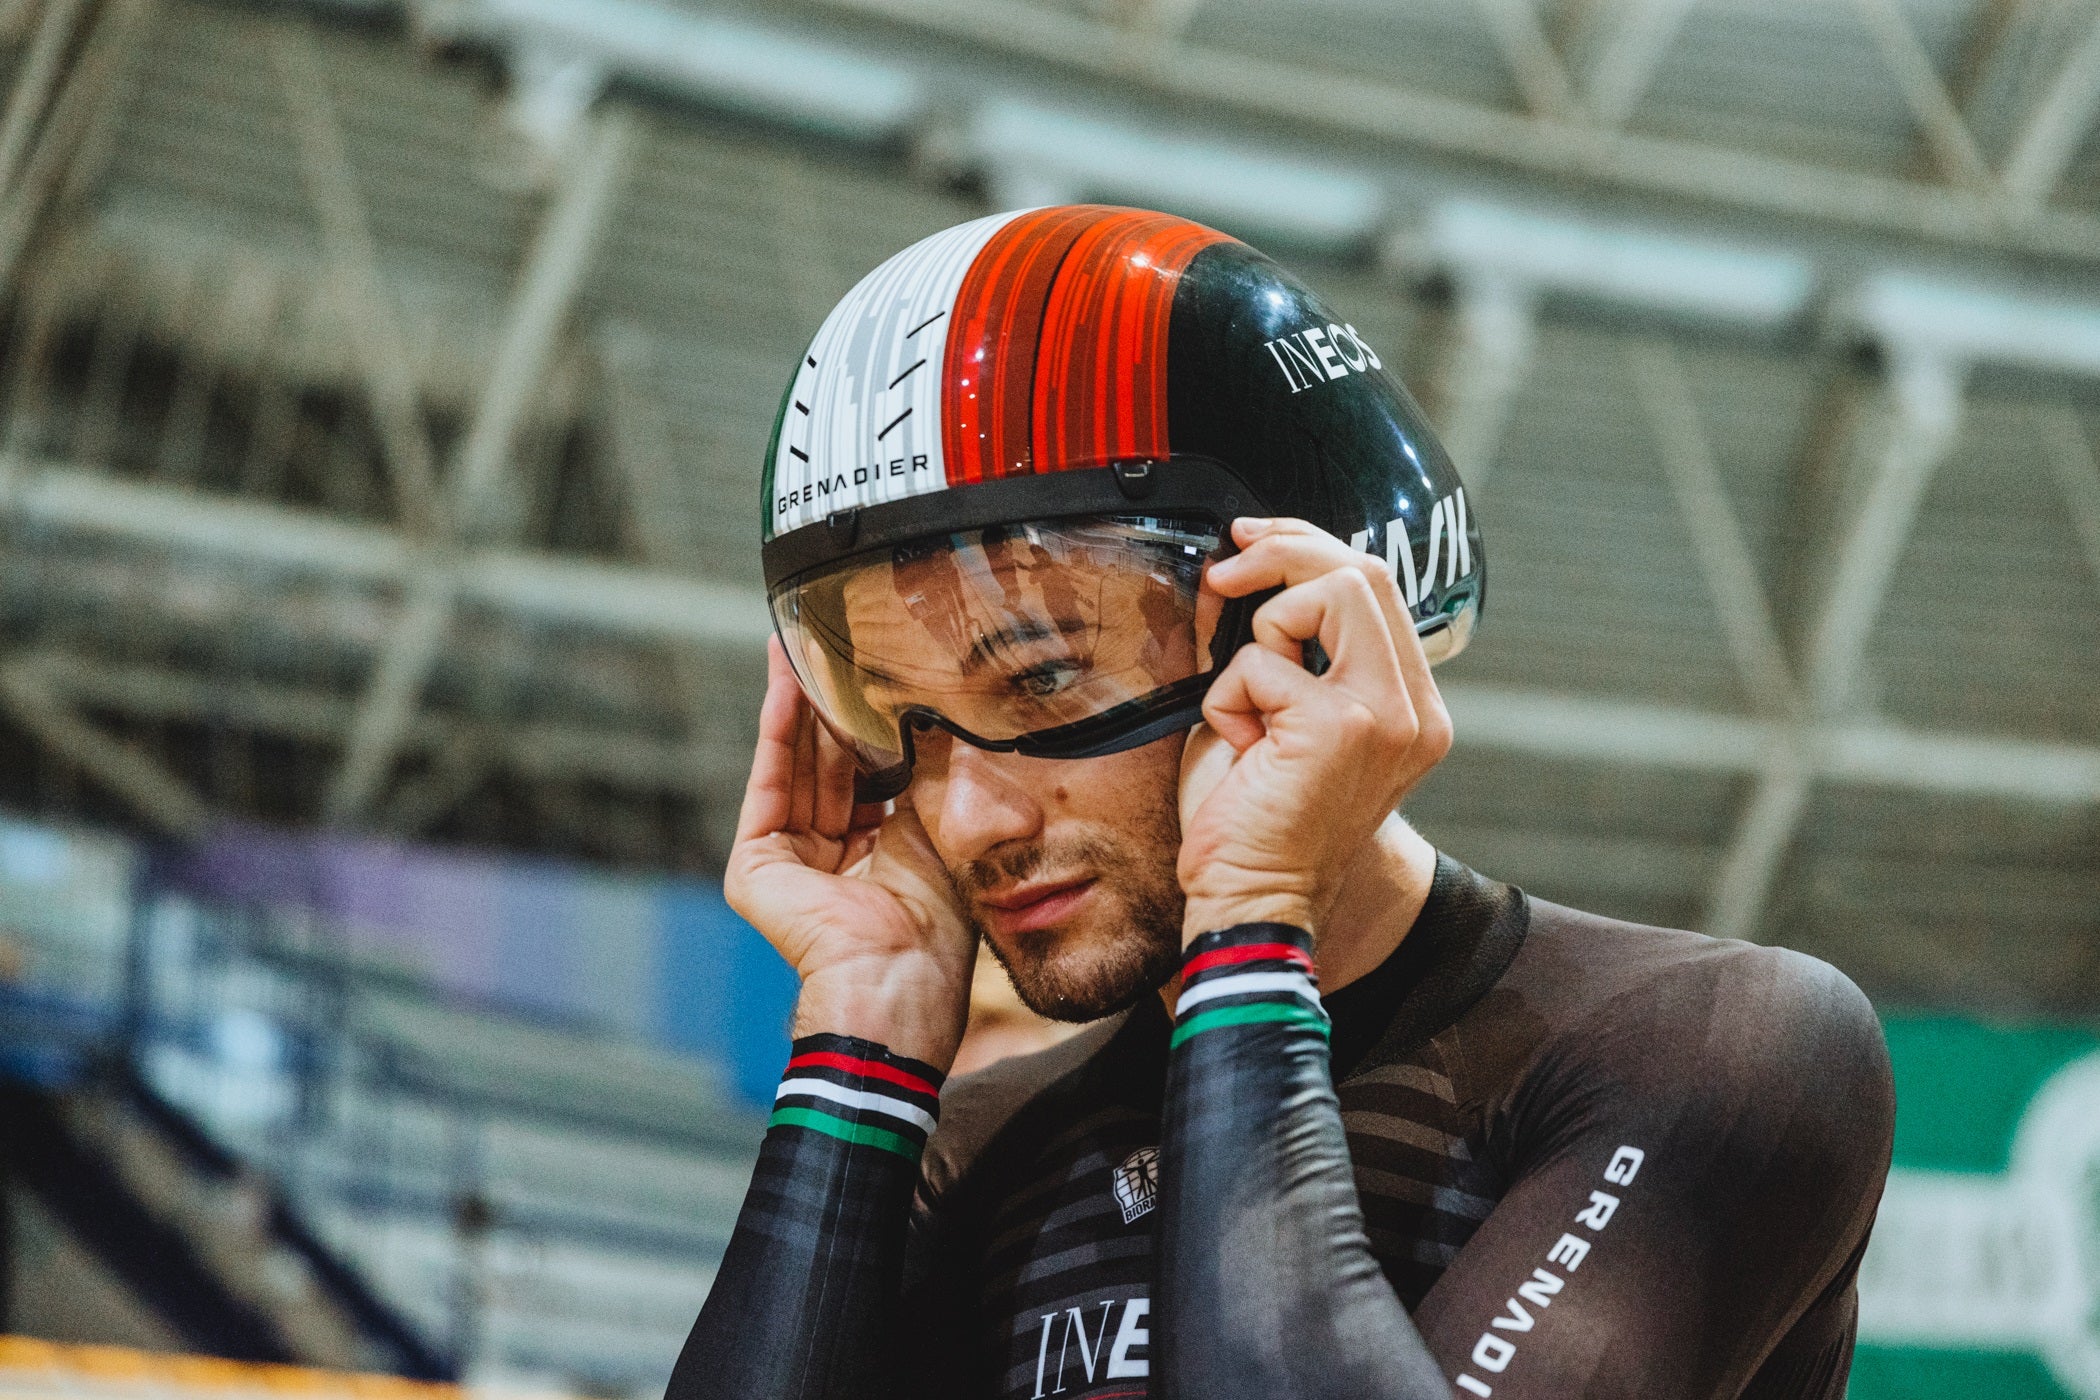 Ganna considering an Hour Record attempt in 2022